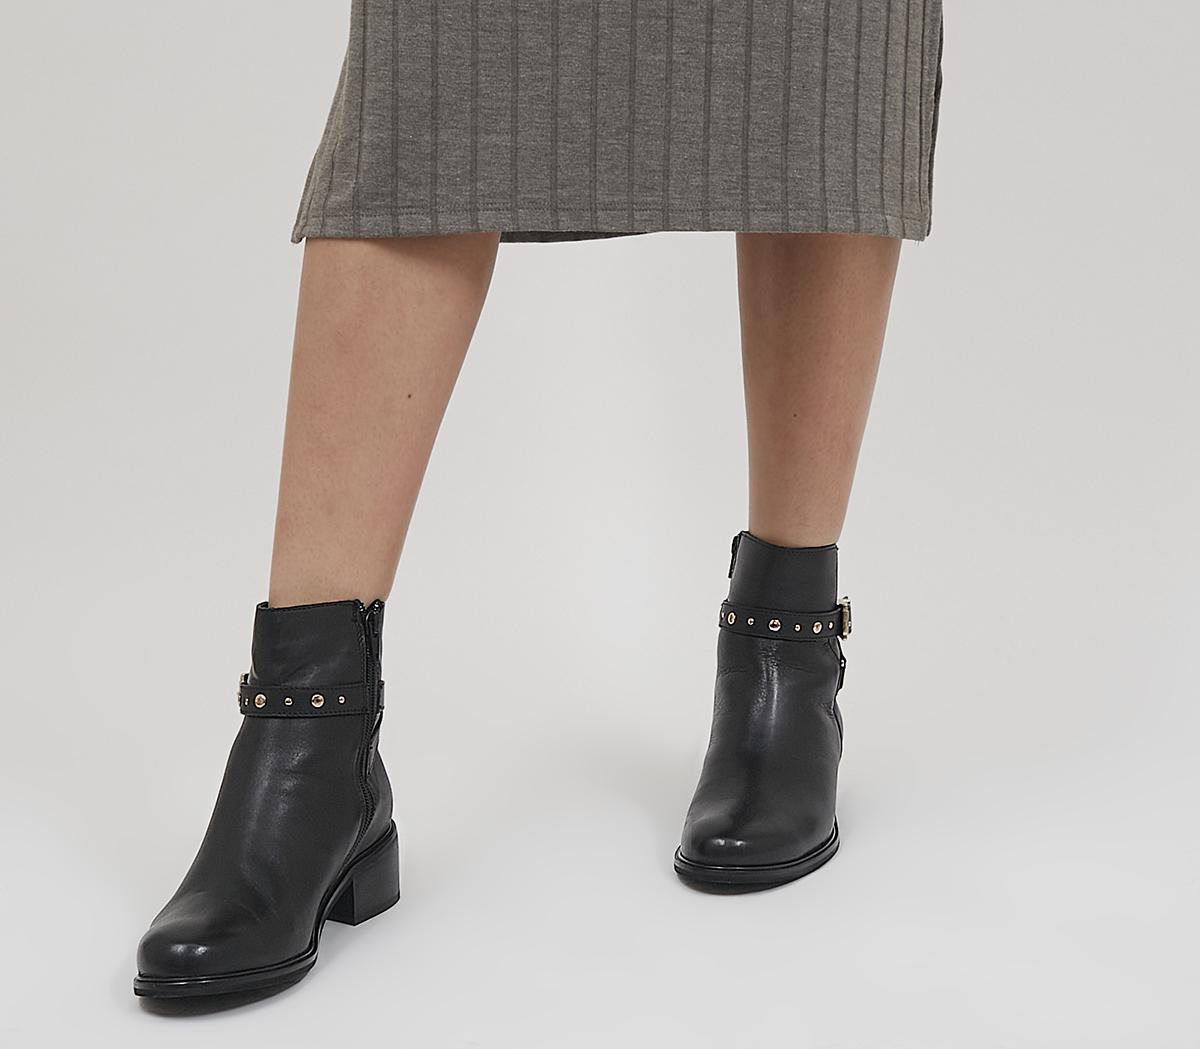 OfficeAbberley Studded Jodpur ZIp-Up Ankle BootsBlack Leather